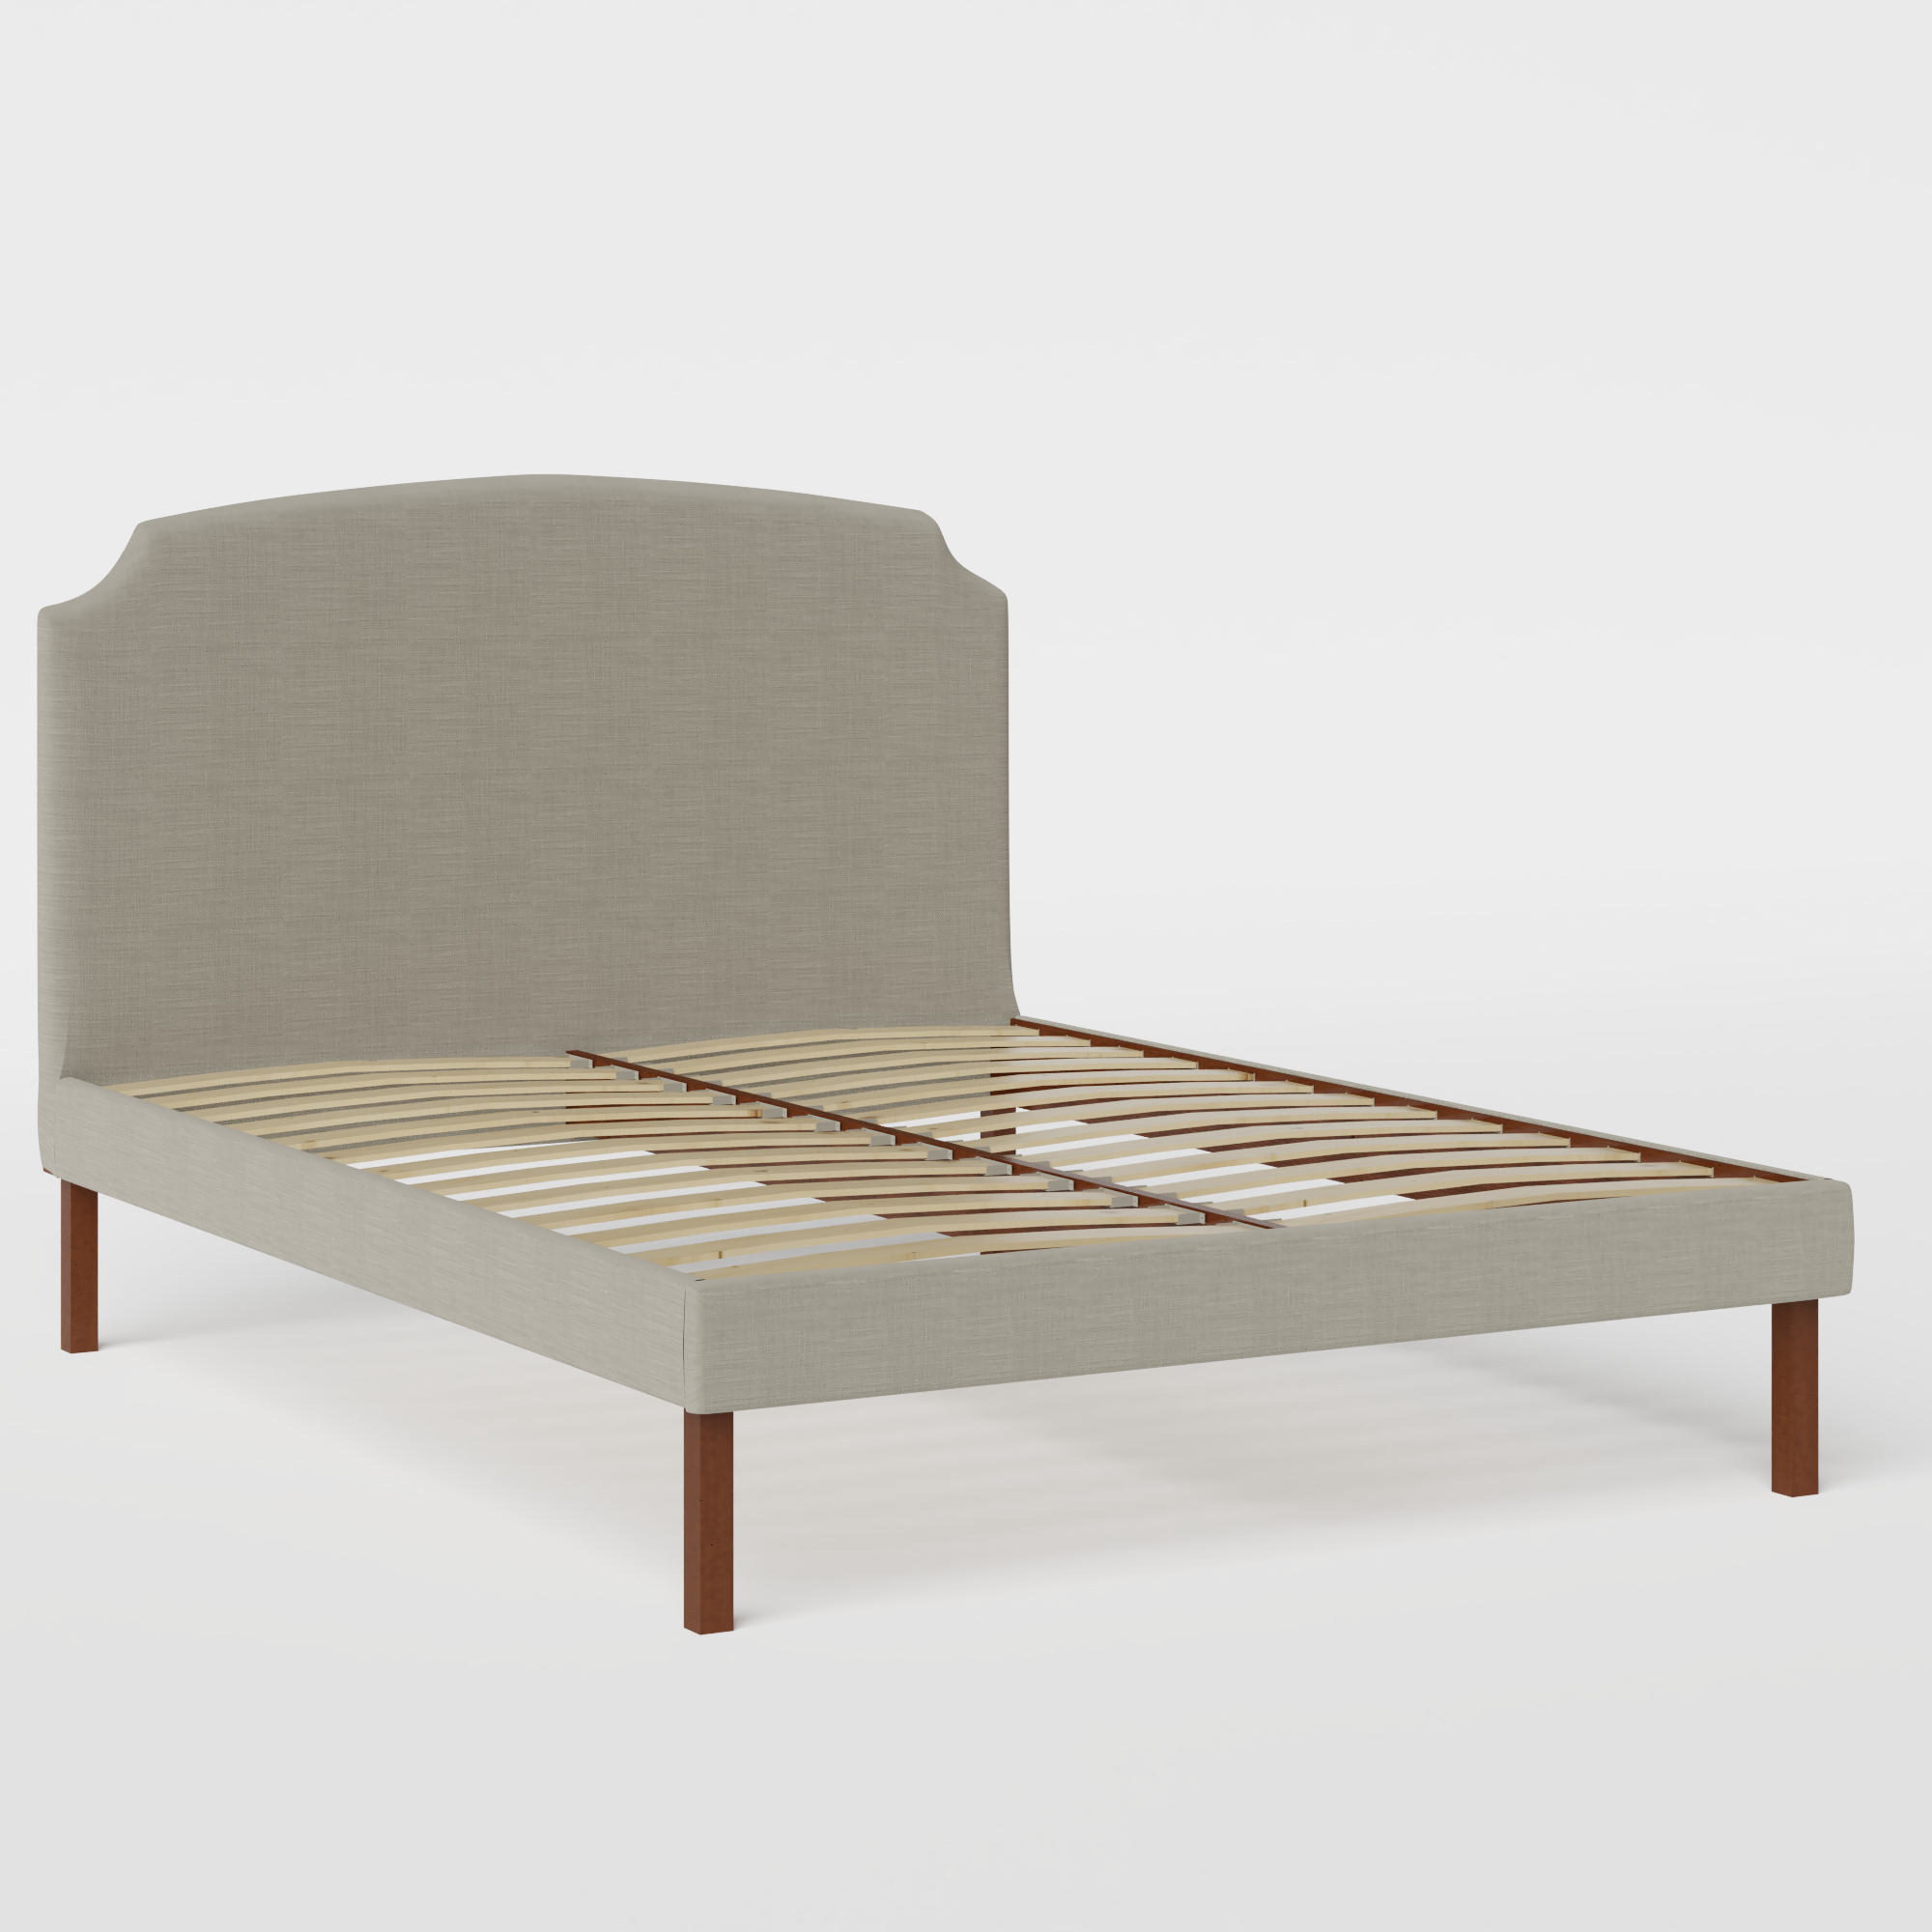 Kobe Upholstered upholstered bed in grey fabric